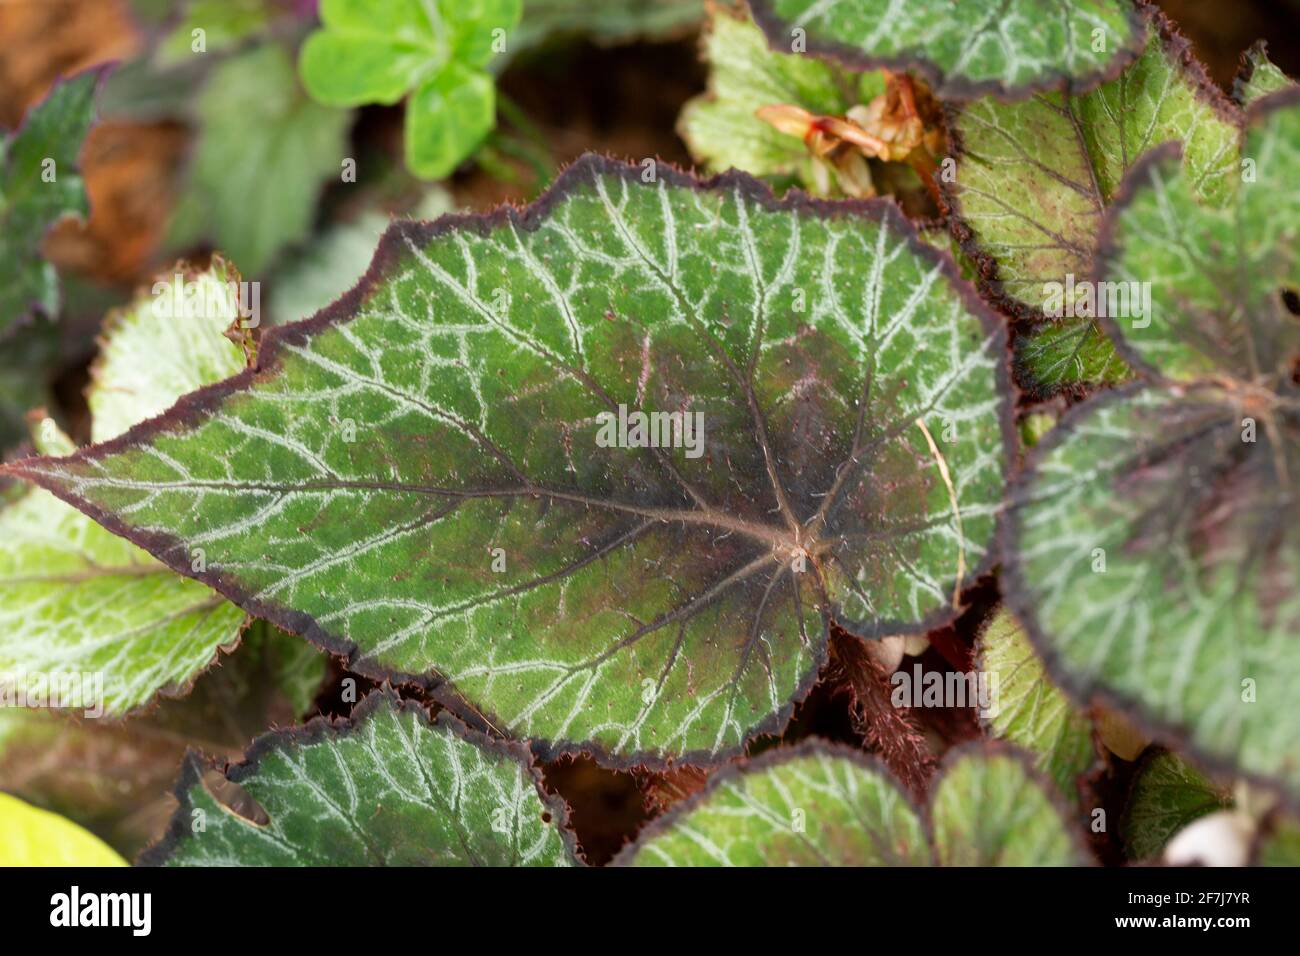 greenery concept, green plants and leaves Stock Photo